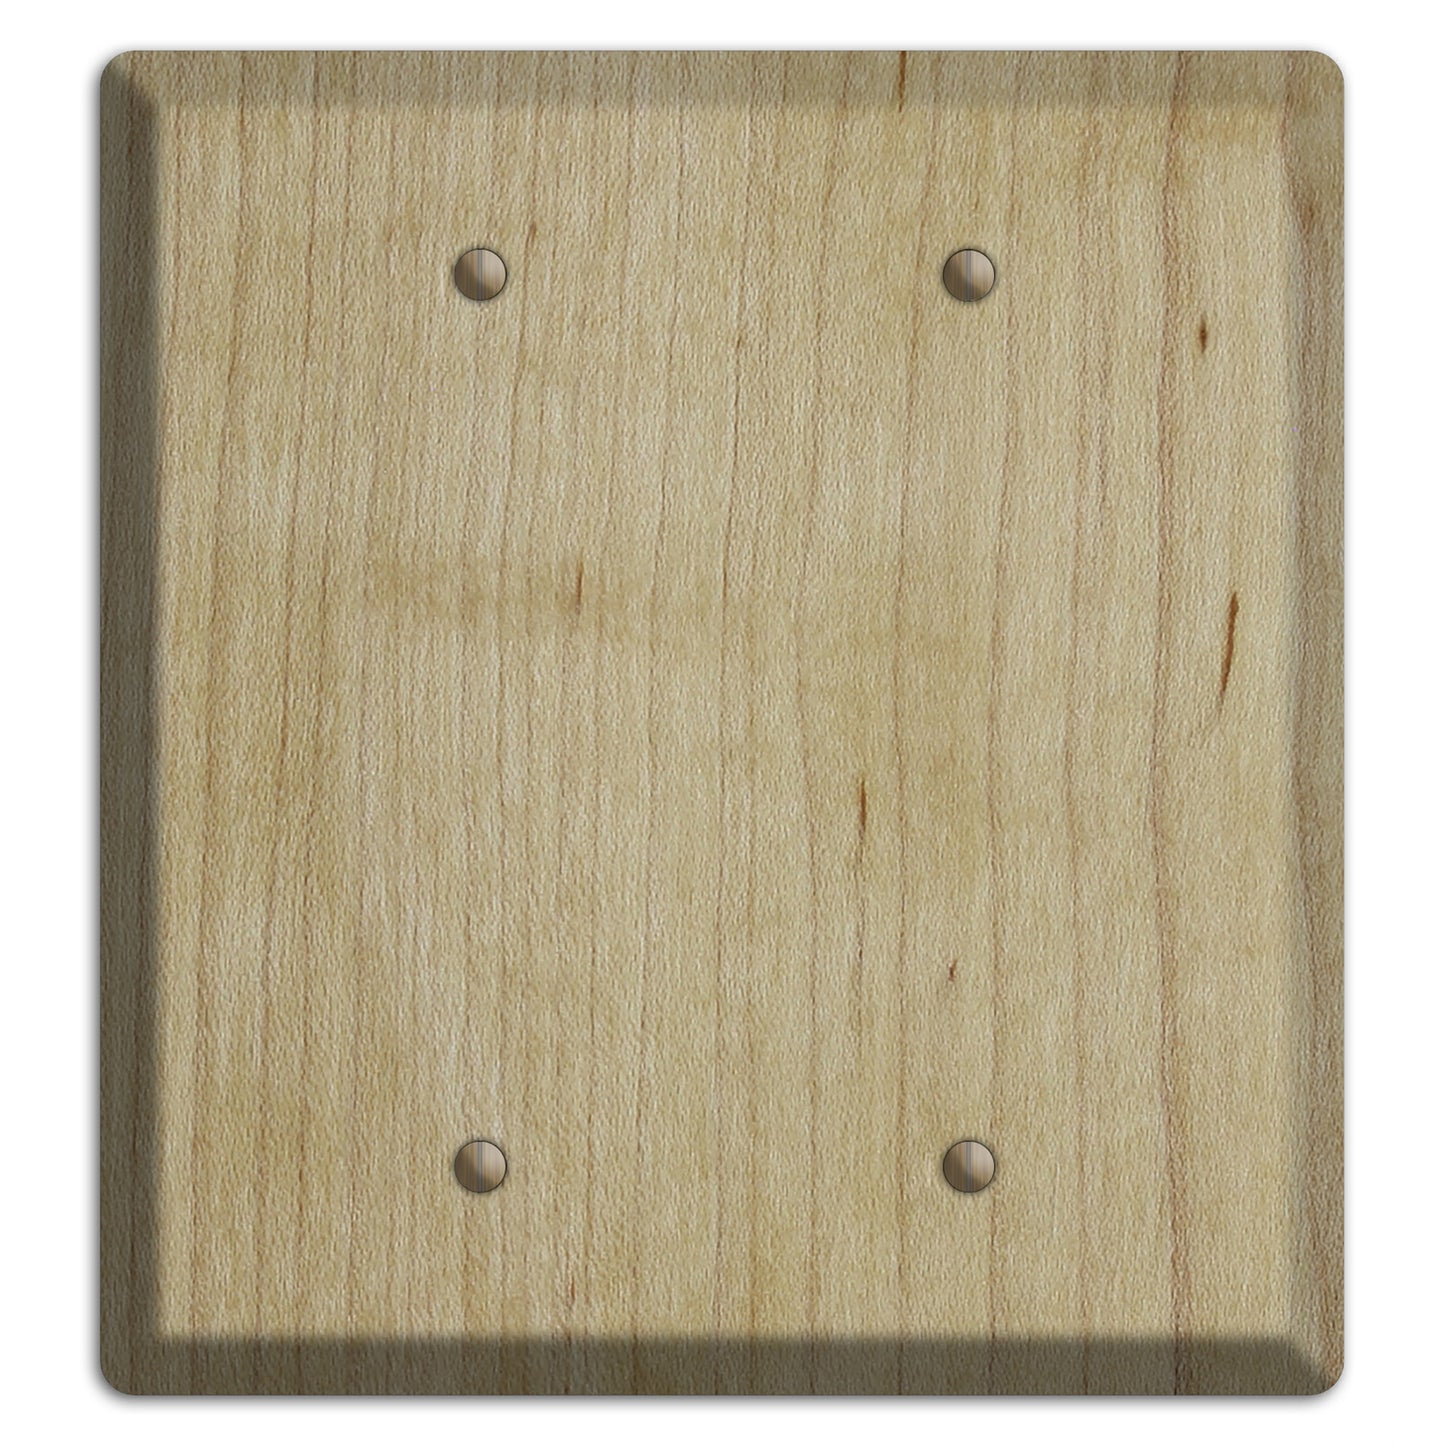 Unfinished Maple Wood Double Blank Cover Plate